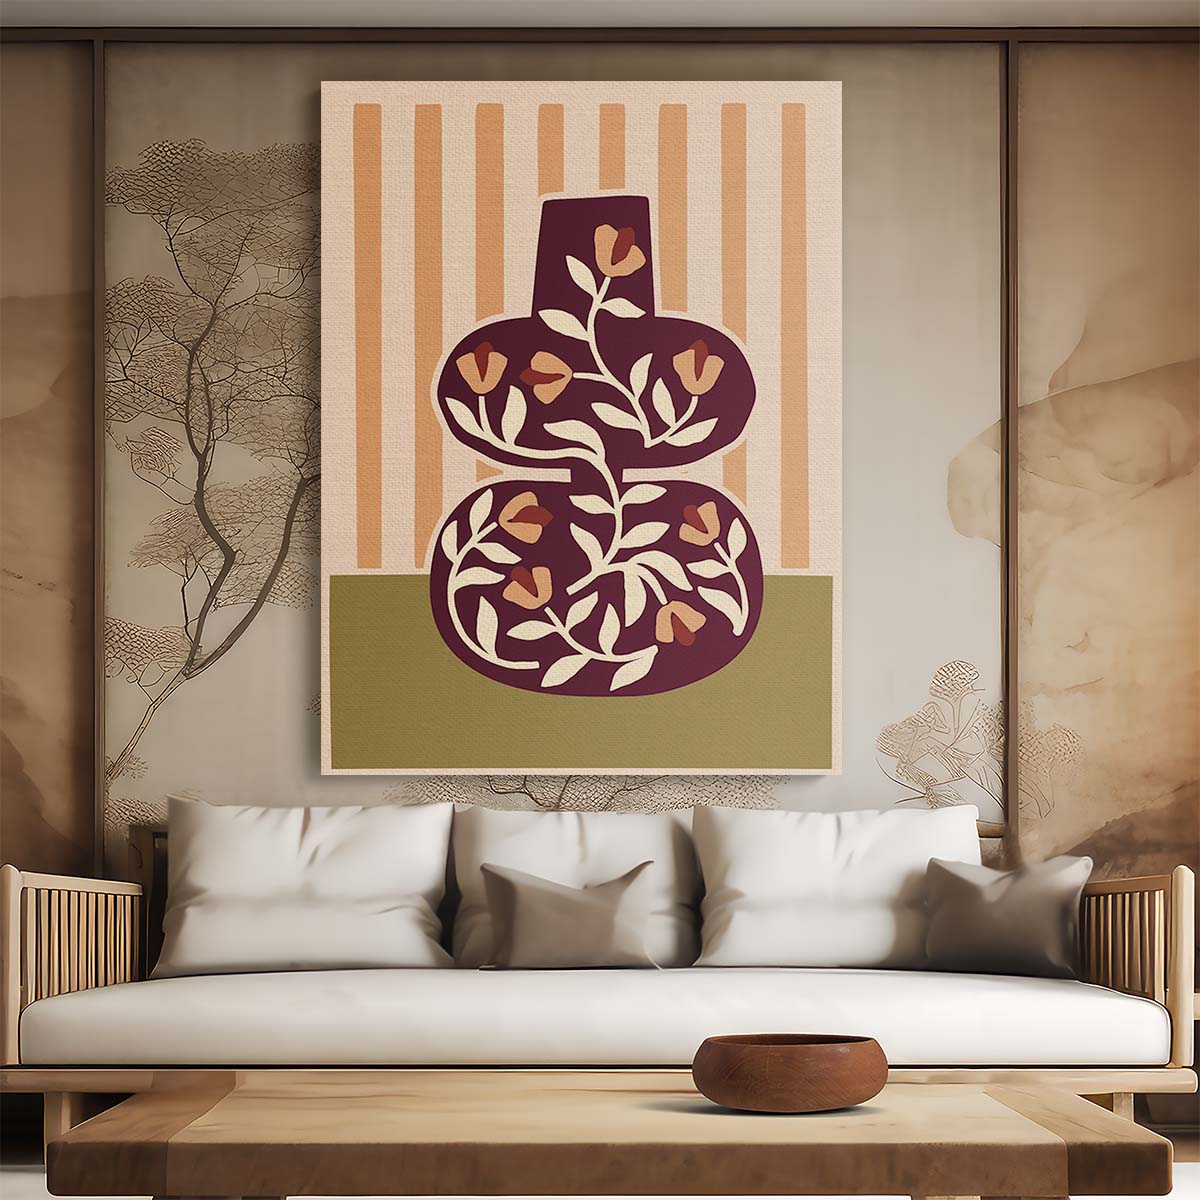 Abstract Floral Illustration of Colourful Botanical Vase Art by Luxuriance Designs, made in USA